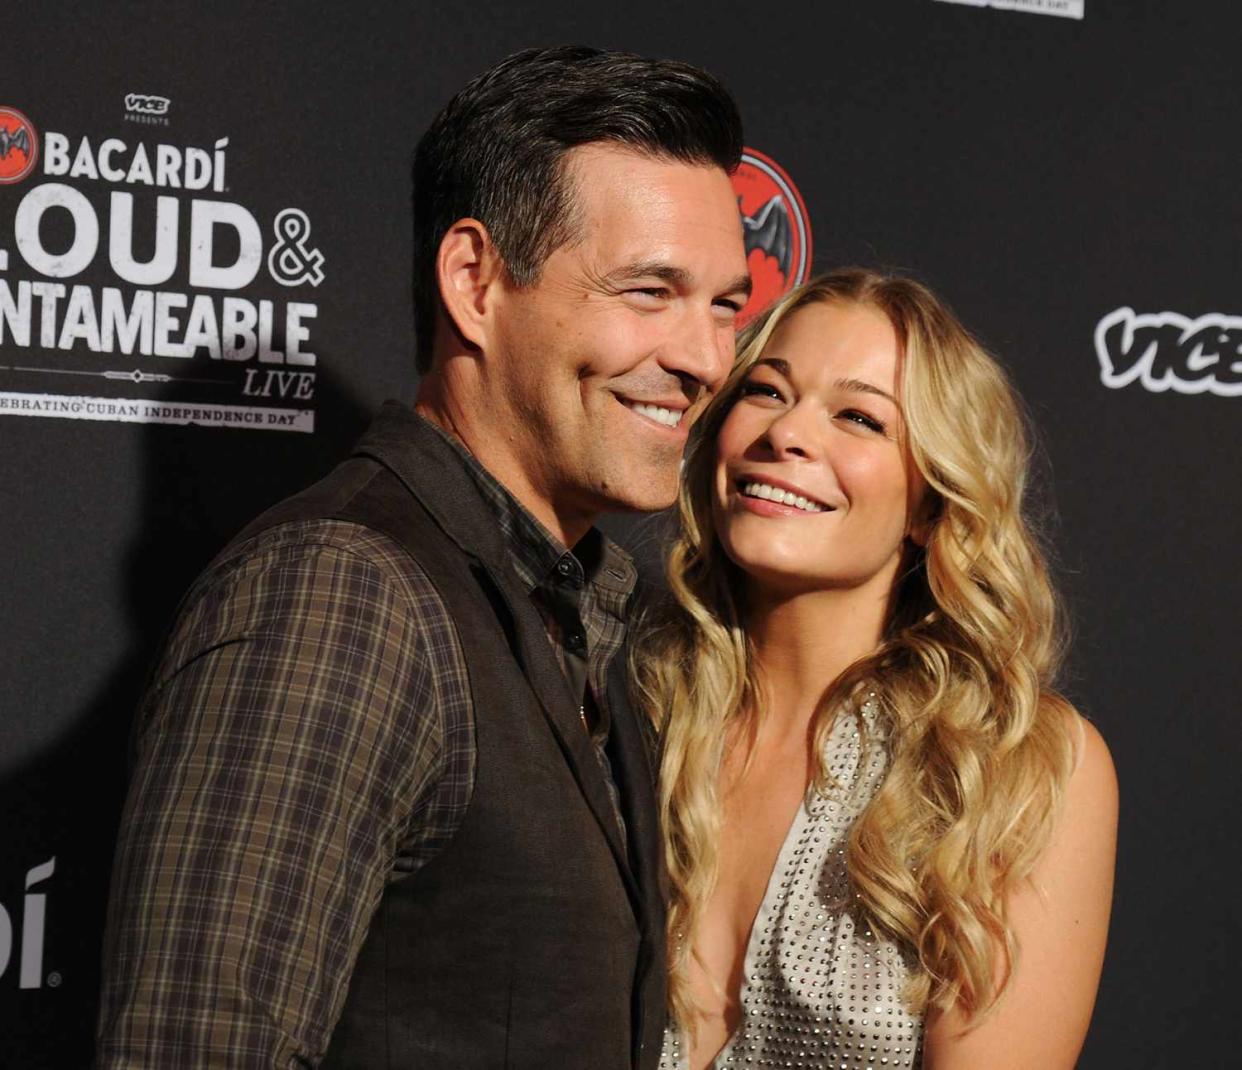 Eddie Cibrian and LeAnn Rimes attend Cuban Independence Day celebration hosted by VICE and Bacardi at Weylin B. Seymour's on May 20, 2014 in New York City